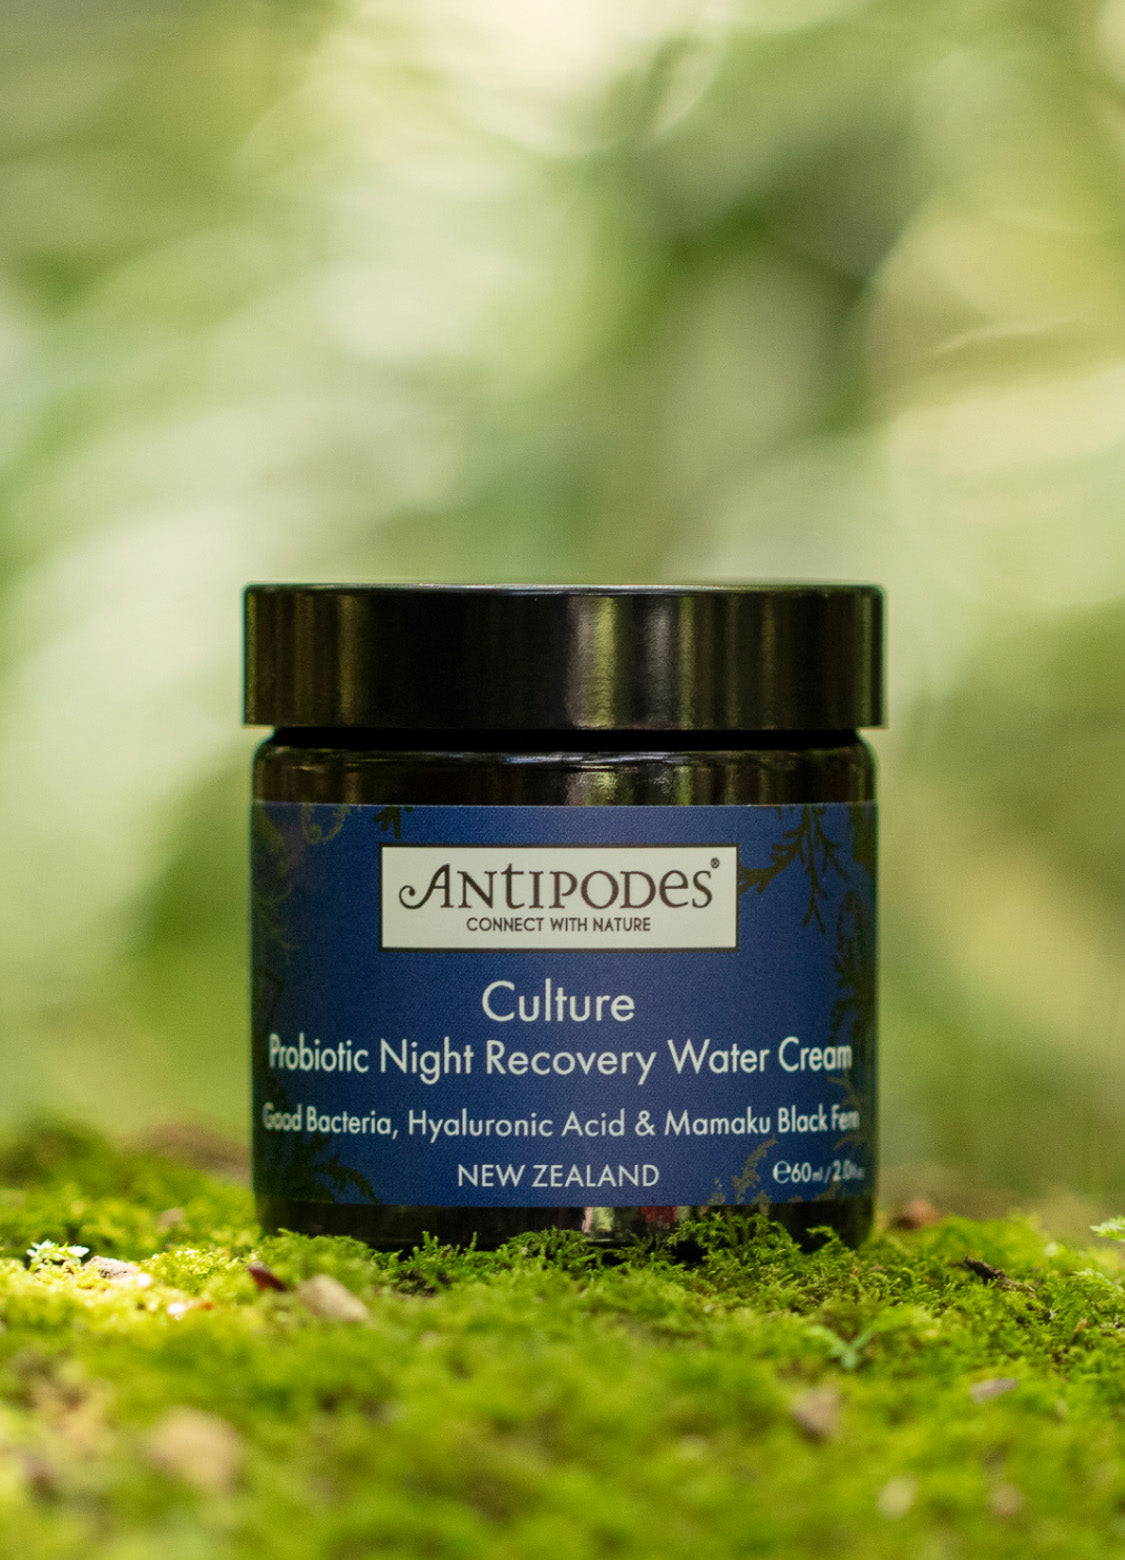 Culture Probiotic Night Recovery Water Cream sitting in nature.